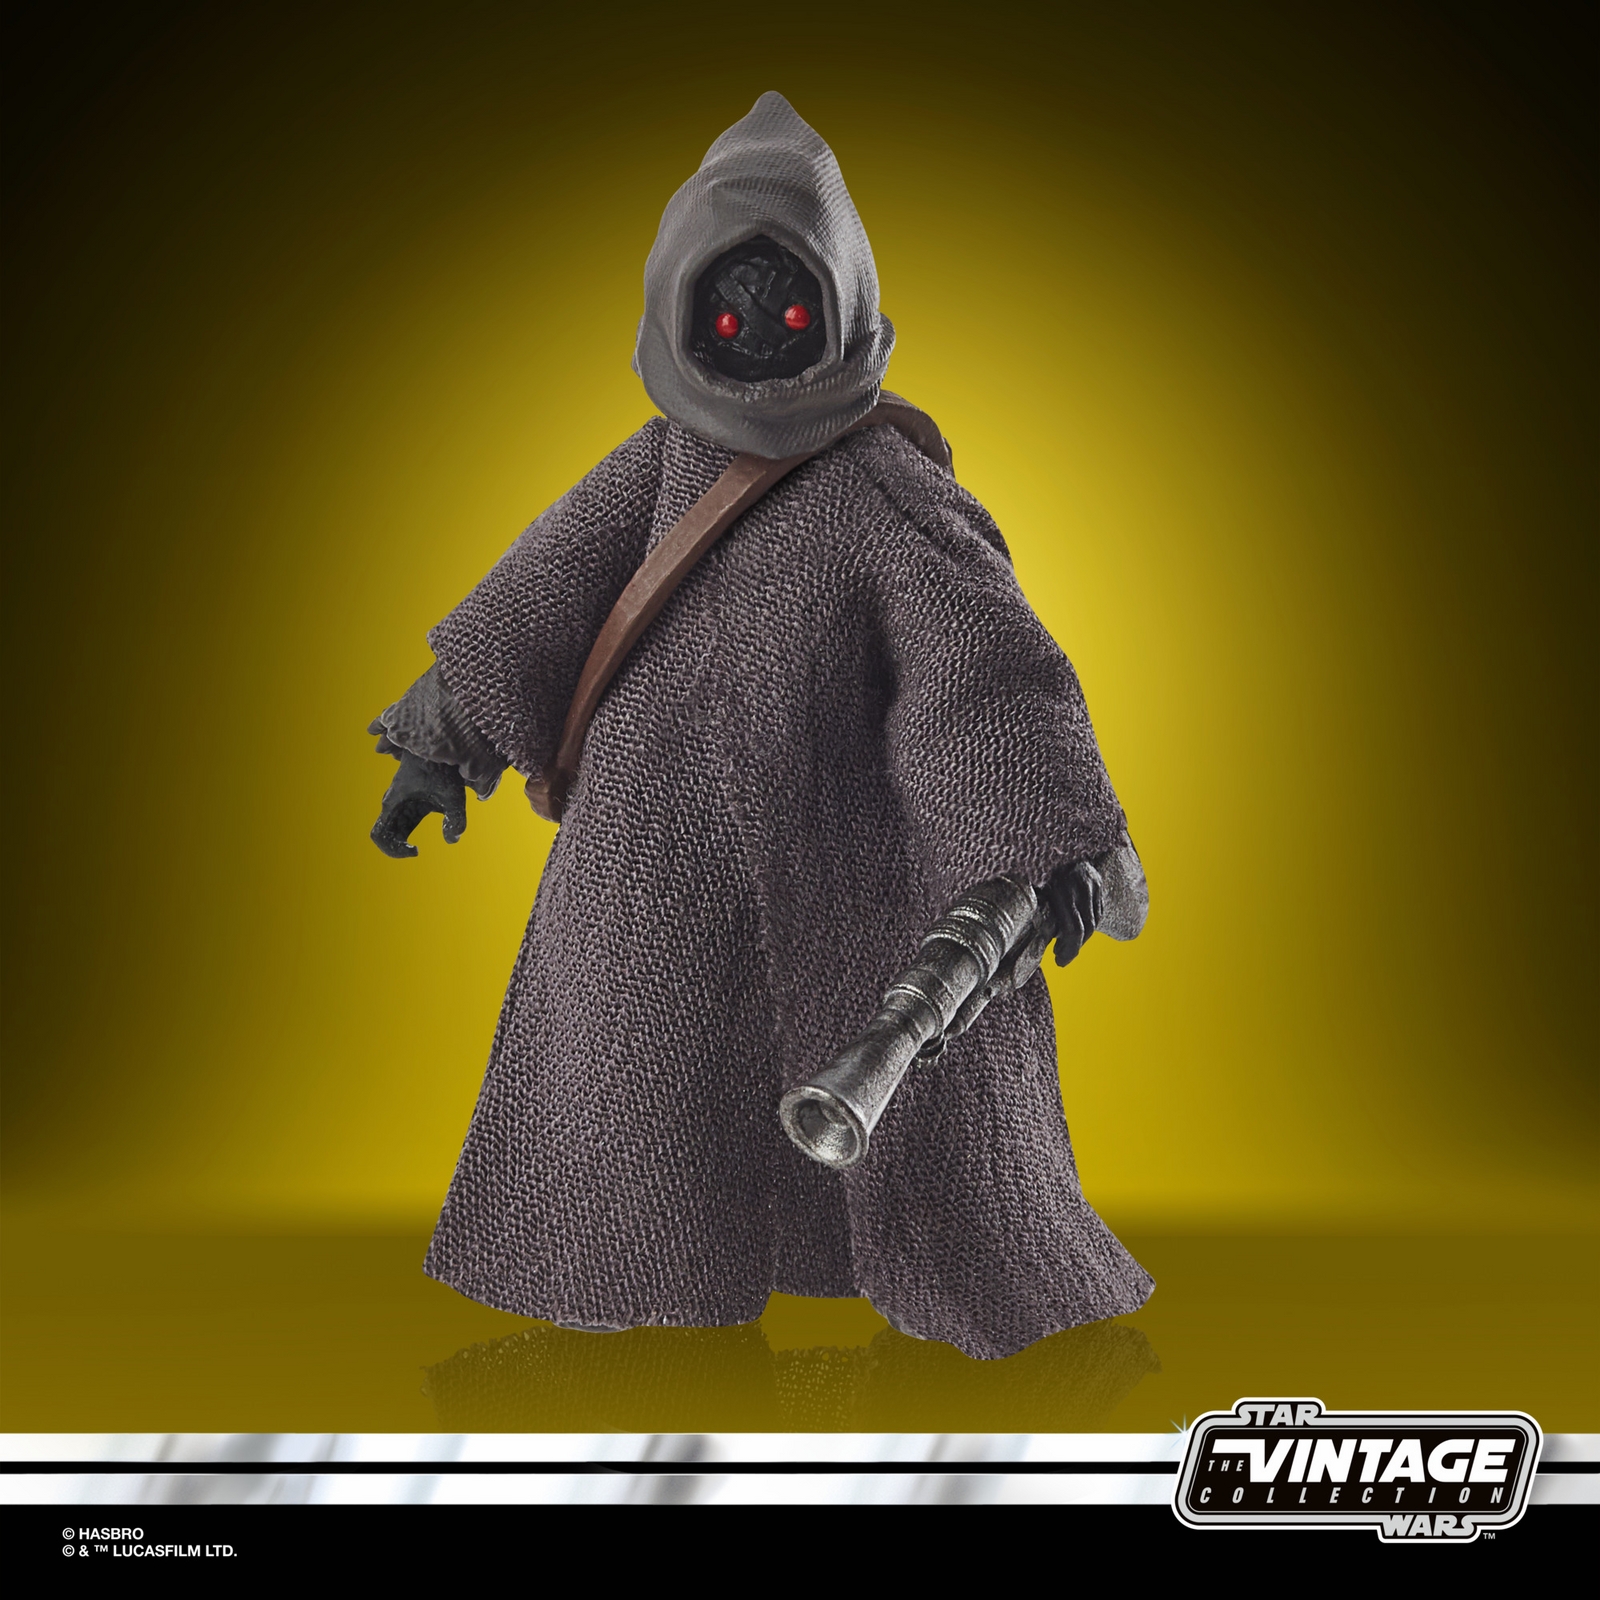 STAR WARS THE VINTAGE COLLECTION 3.75-INCH OFFWORLD JAWA (ARVALA-7) Figure  - oop (4).jpg